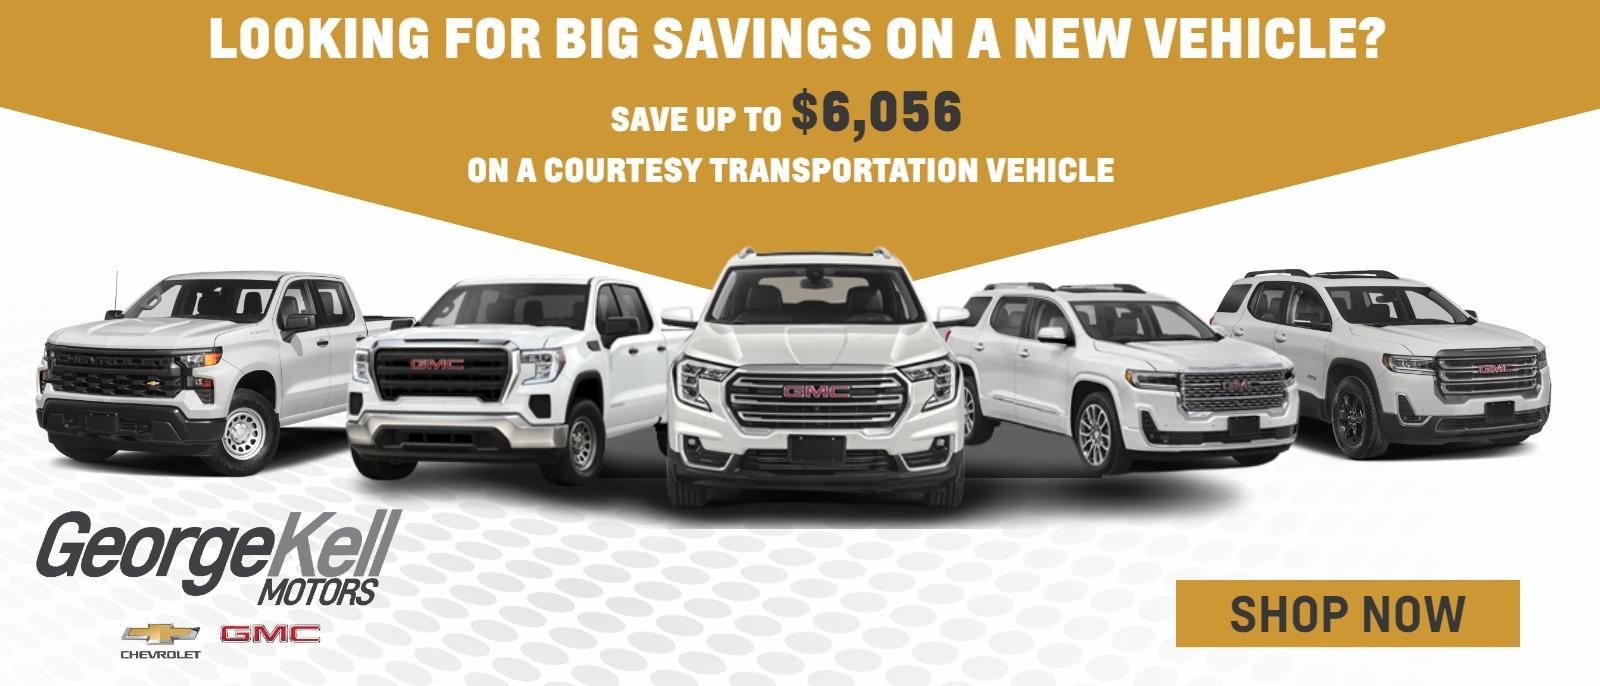 LOOKING FOR BIG SAVINGS ON A NEW VEHICLE?
SAVE UP TO $6,056 ON A COURTESY TRANSPORTATION VEHICLE